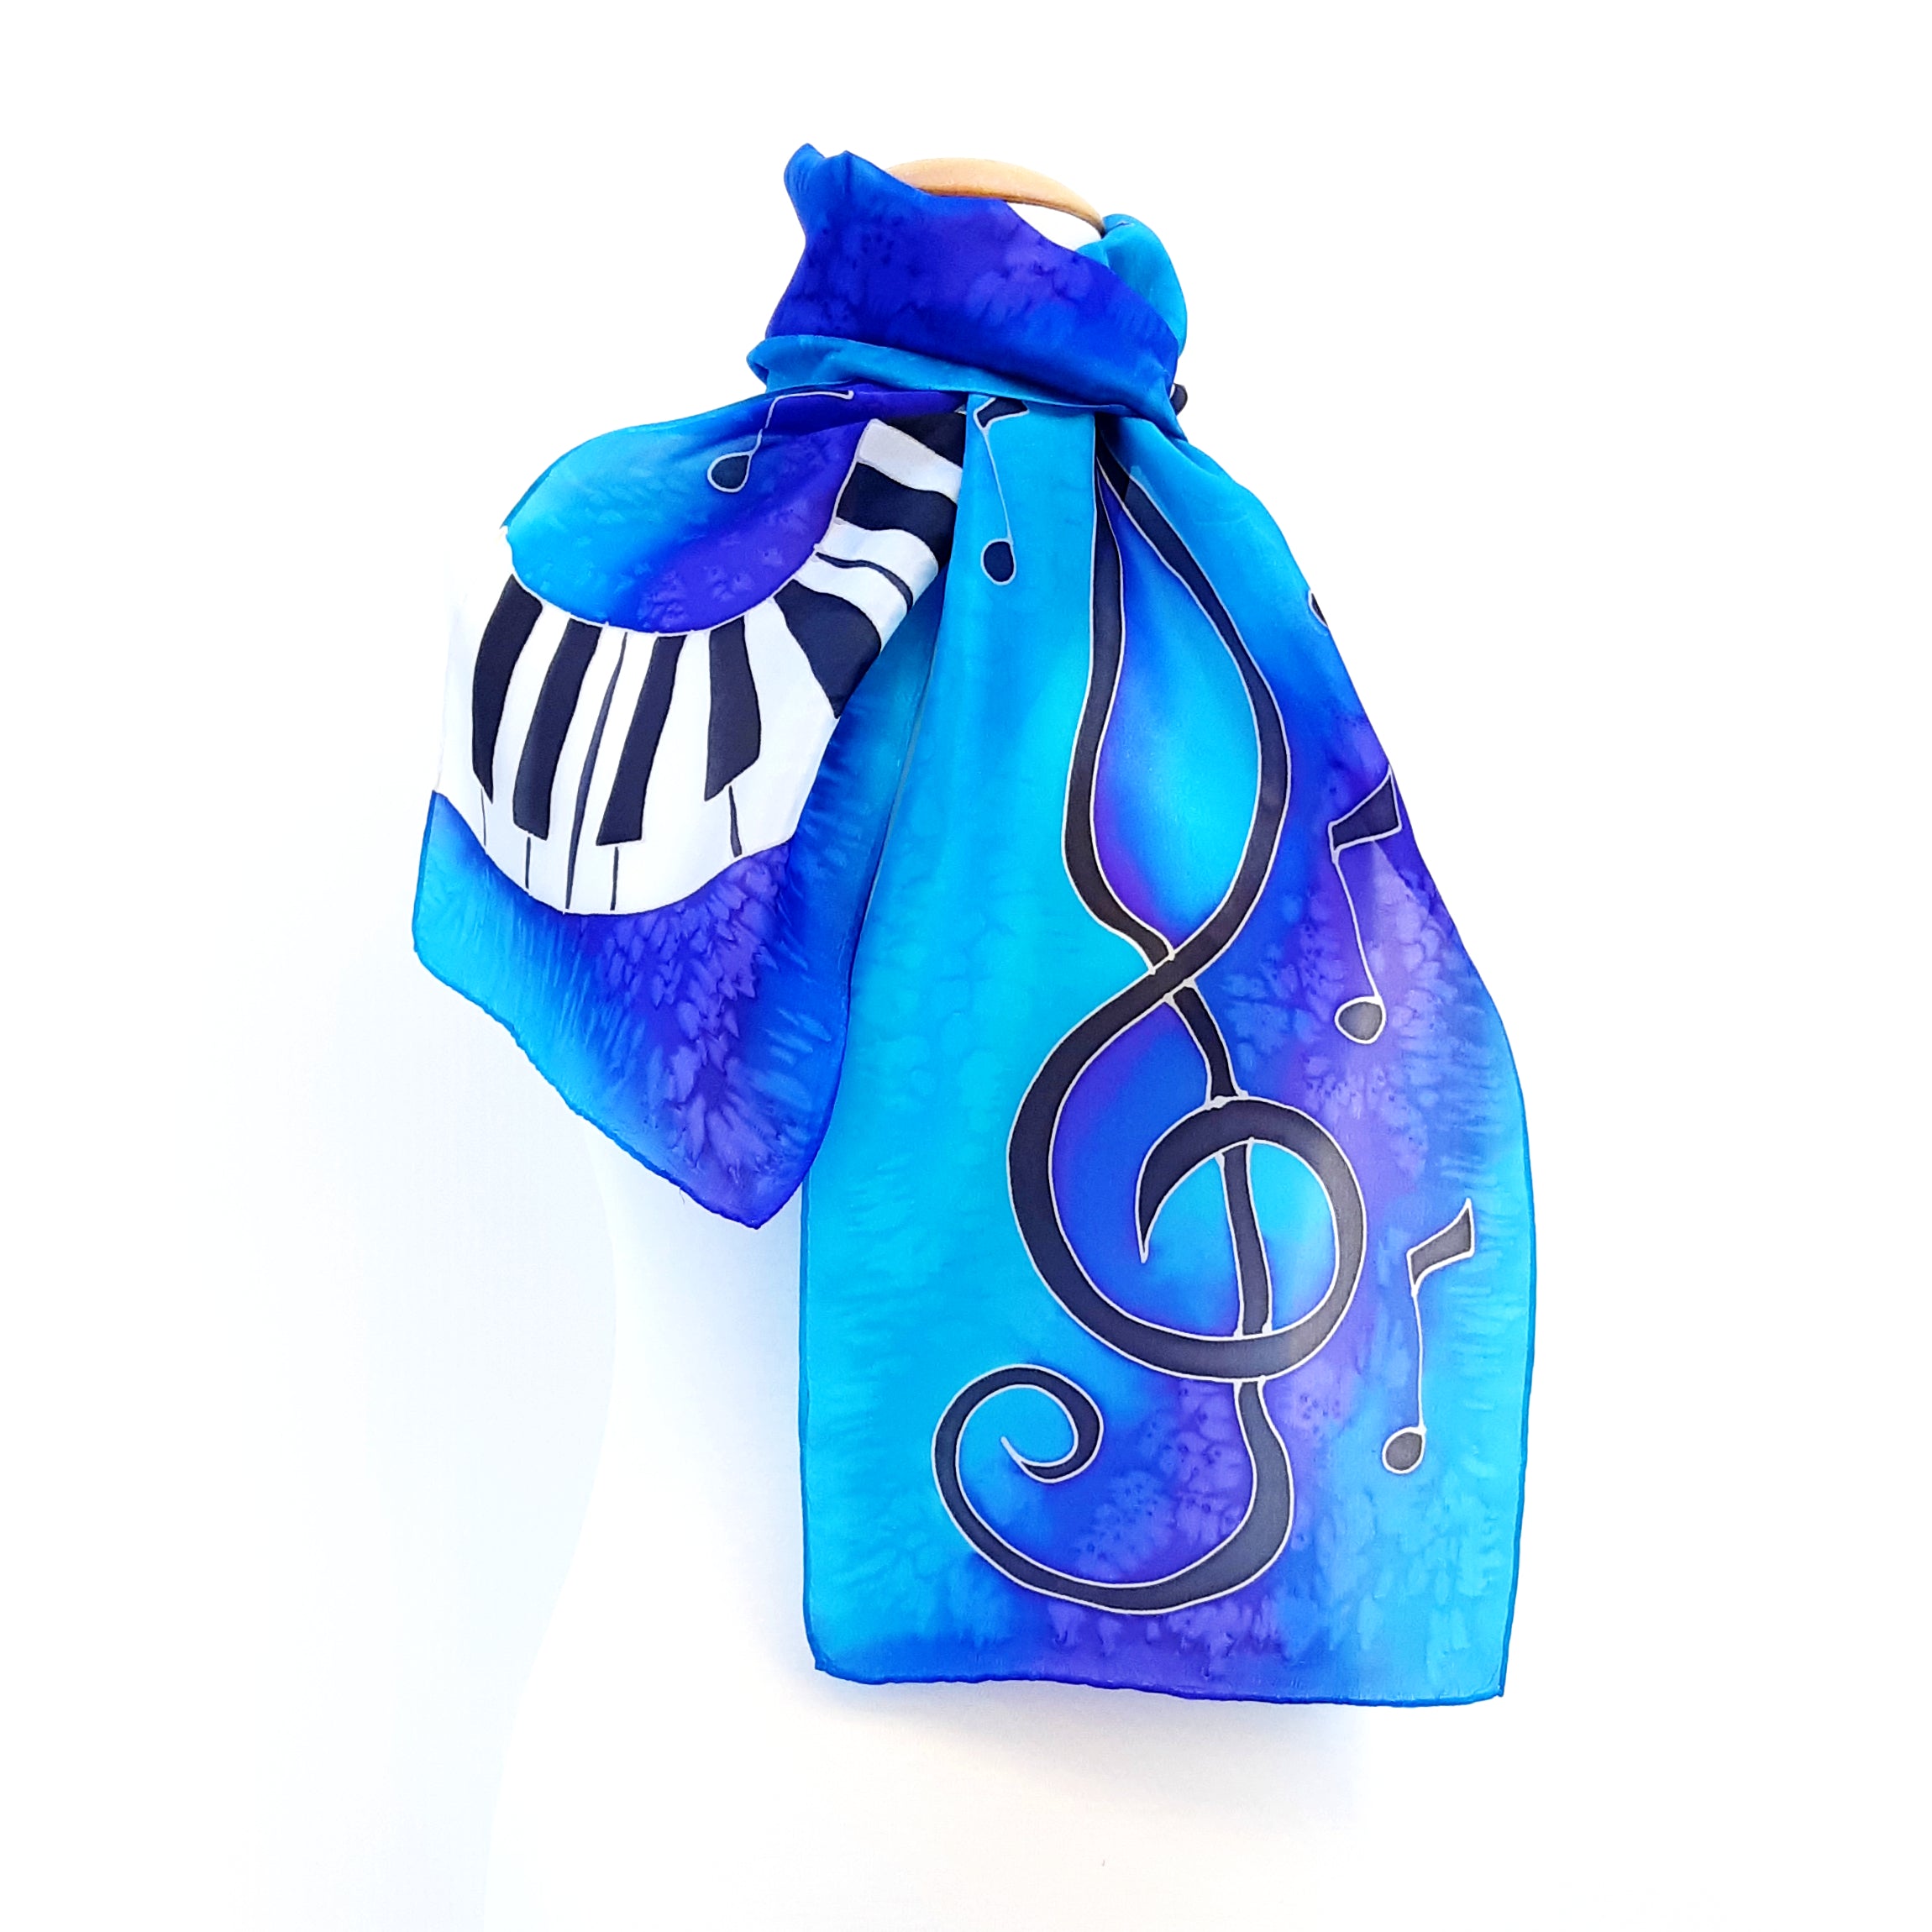 design silk scarf with piano treble clef and music notes made by Lynne Kiel